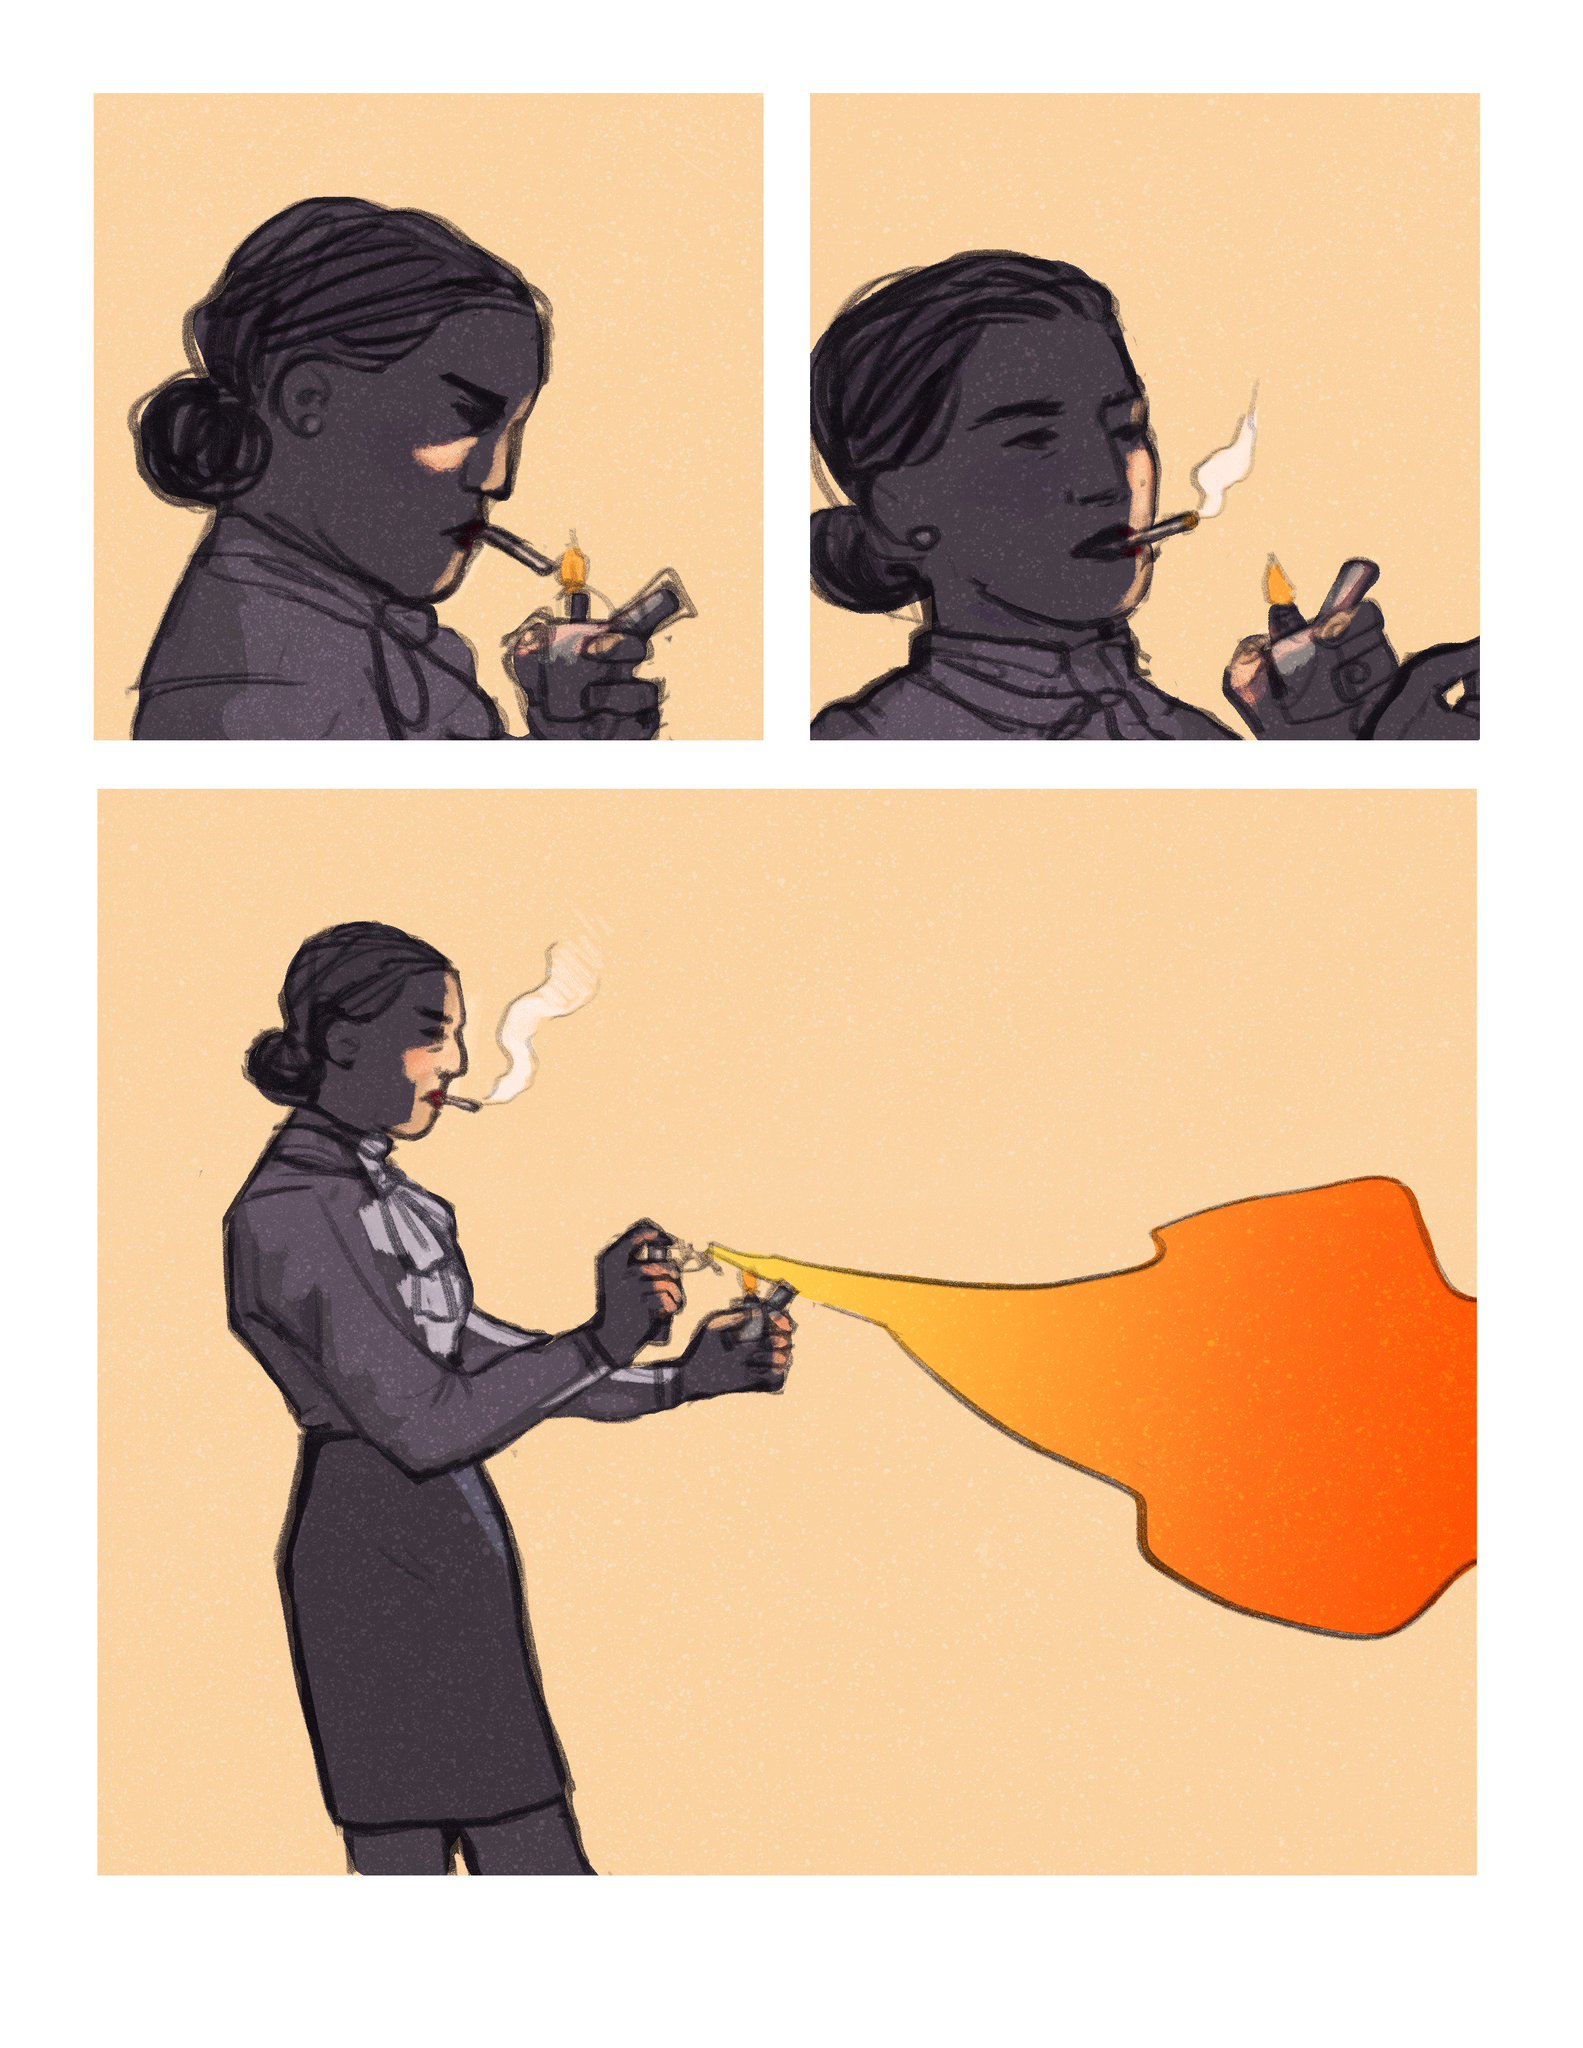 Agent Seals using her cigarette, lighter, and a bottle of air freshener to create a flamethrower